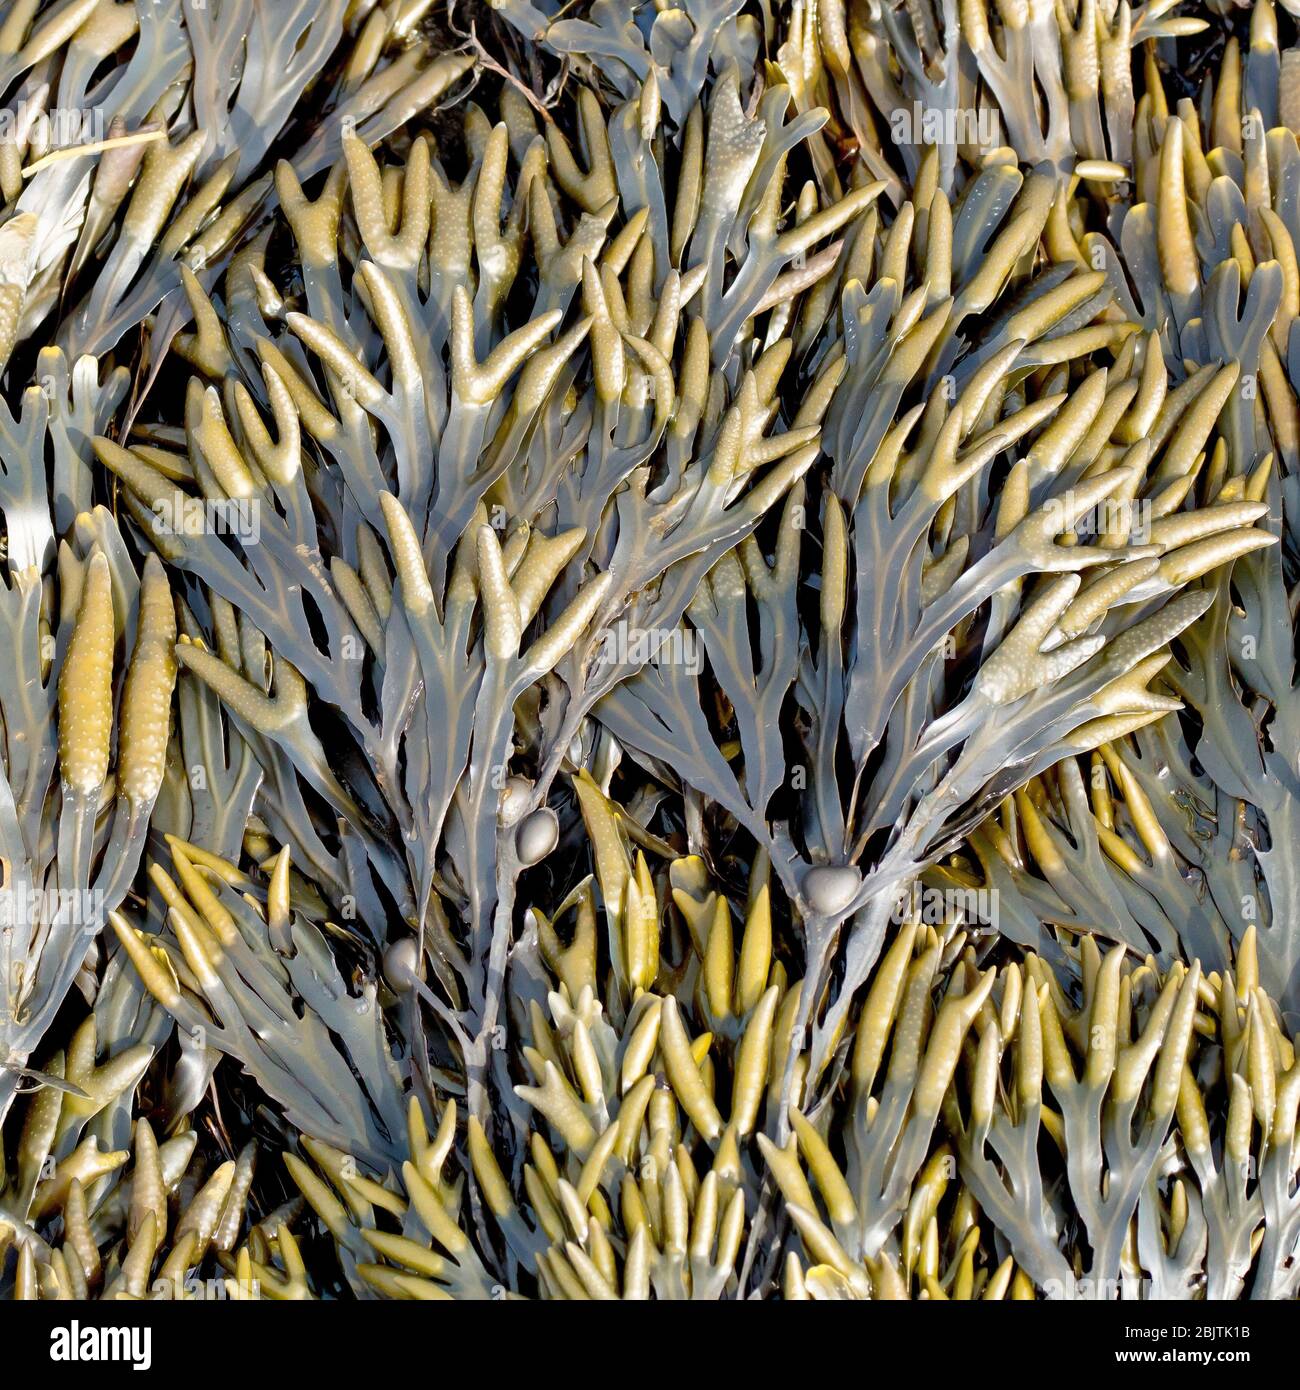 Bladder Wrack (fucus vesiculosis), close up showing the seaweed laying flat on the foreshore. Stock Photo